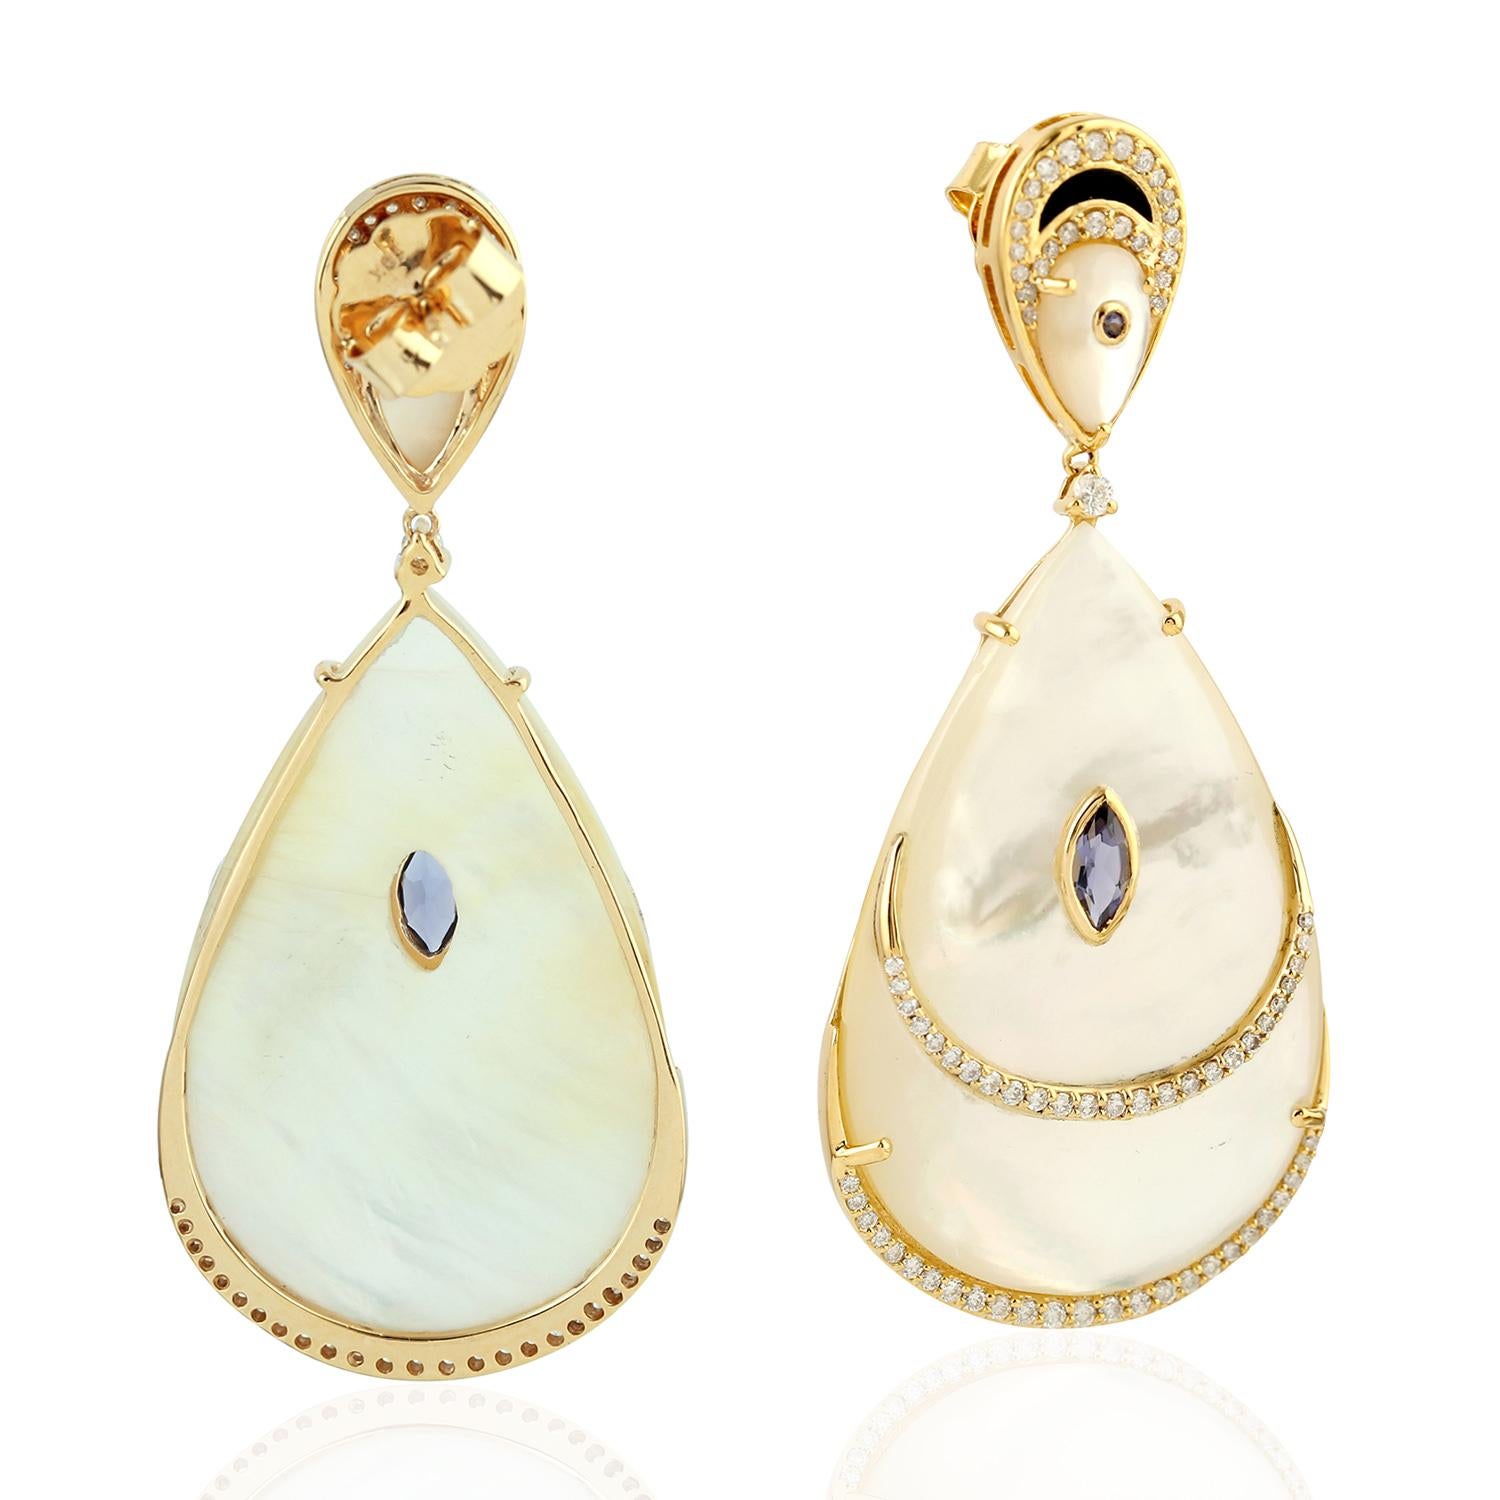 gold earrings designs for mothers